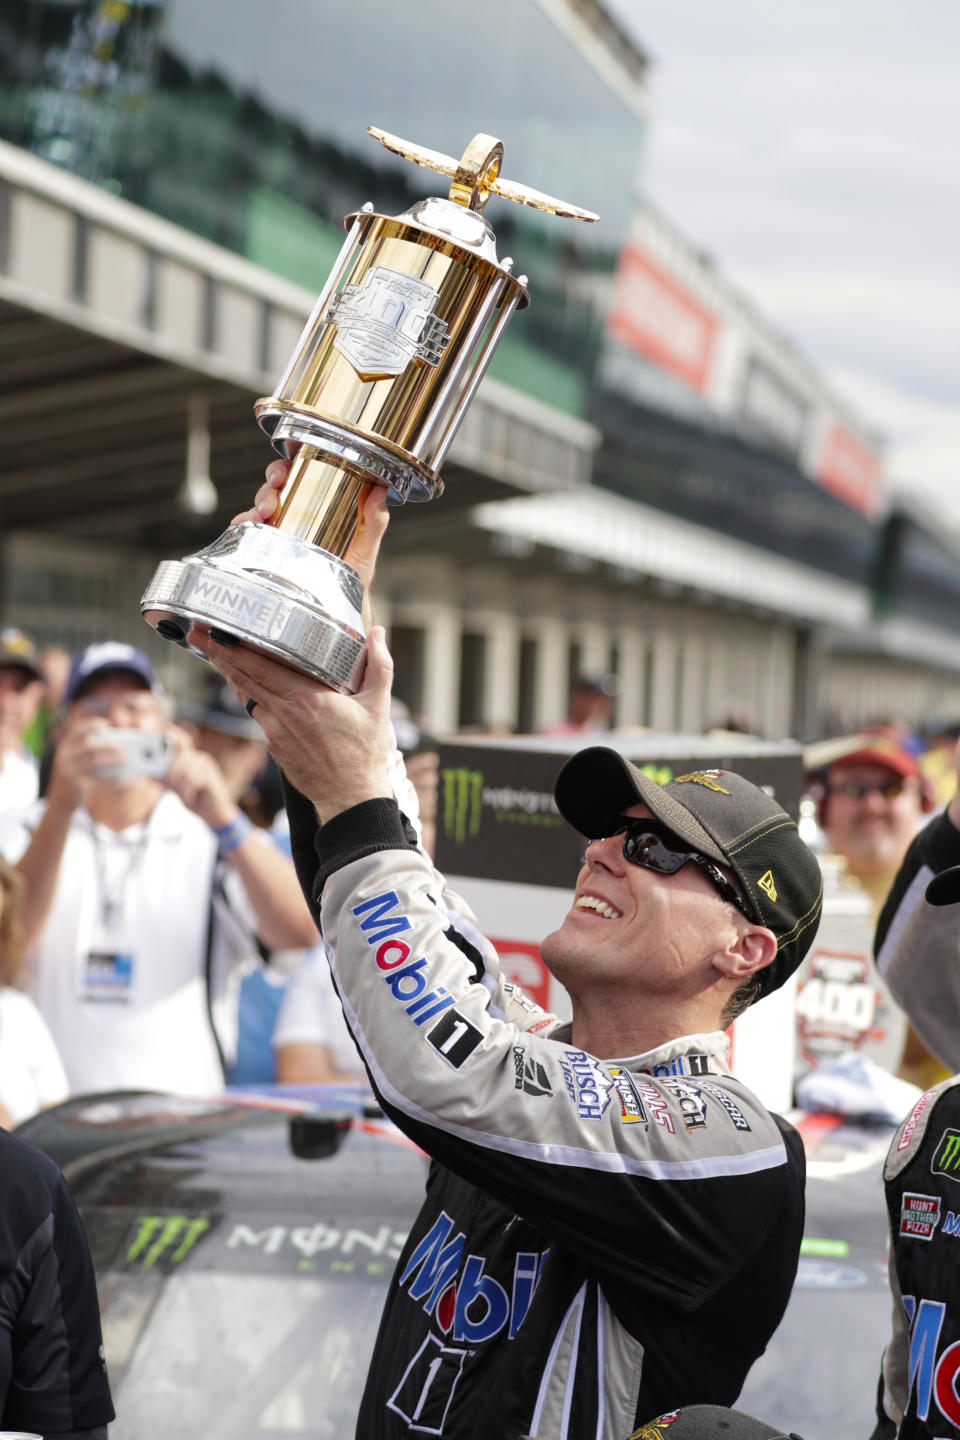 Kevin Harvick celebrates after winning the NASCAR Brickyard 400 auto race at Indianapolis Motor Speedway, Sunday, Sept. 8, 2019, in Indianapolis. (AP Photo/Michael Conroy)